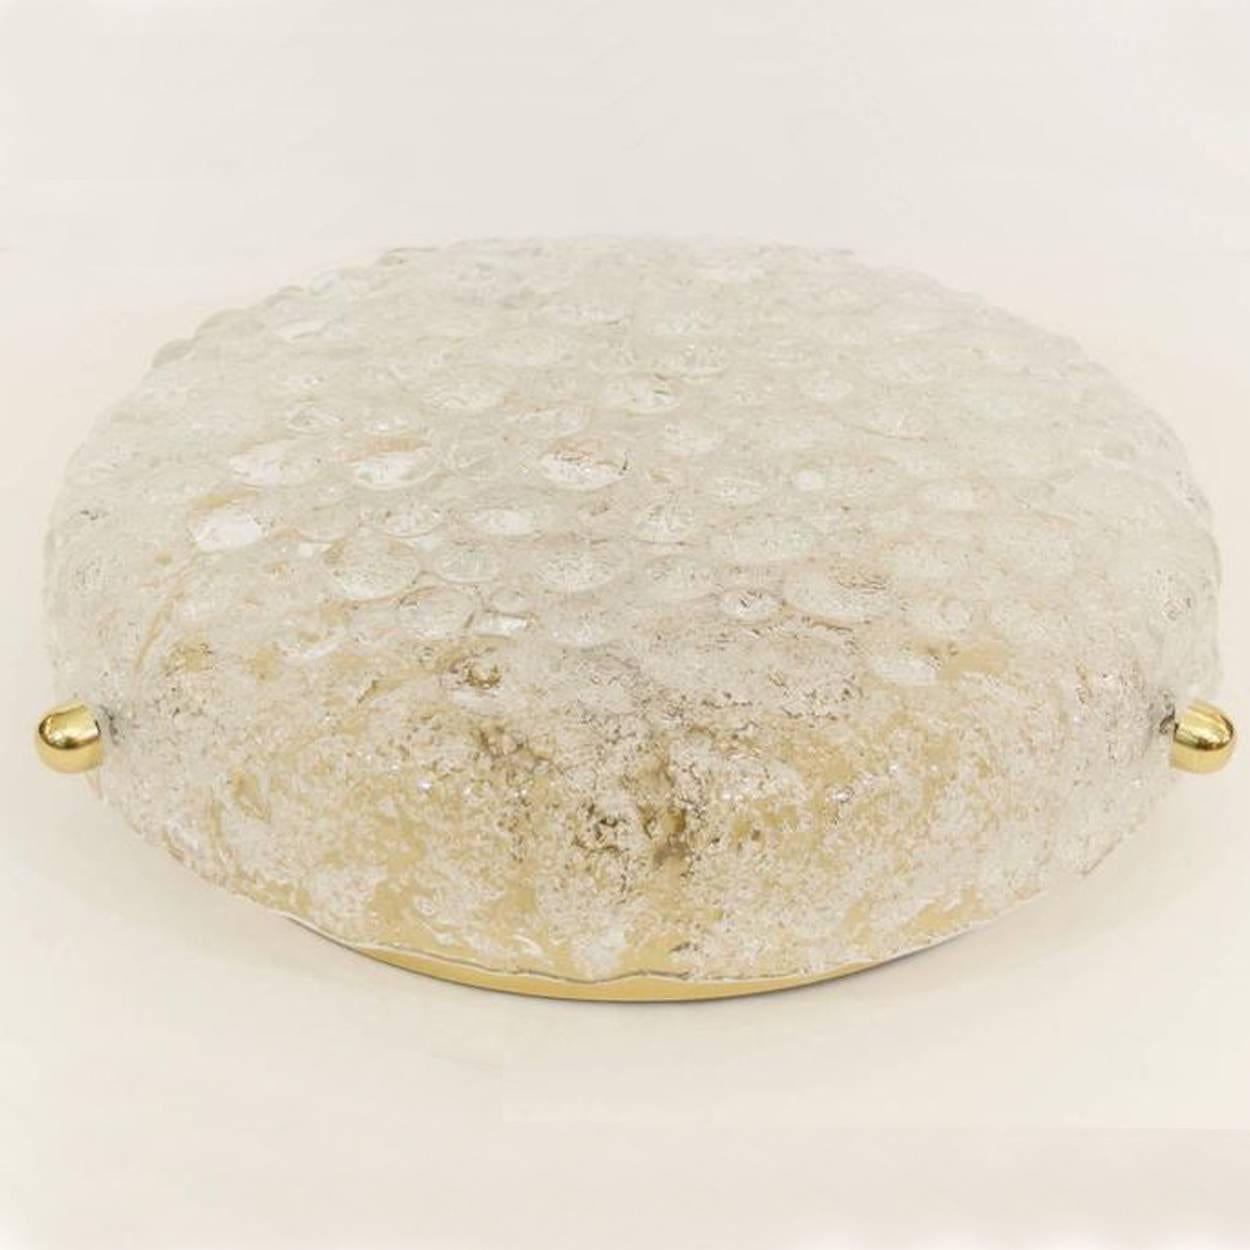 three  high quality modern textured ice glass flush mounts by Hillebrand, circa 1965.
This flush mounts are featuring a huge round glass dish.

The dish is handmade of 'Frit' glass.

Many of tiny glass herds which are molded into the glass during